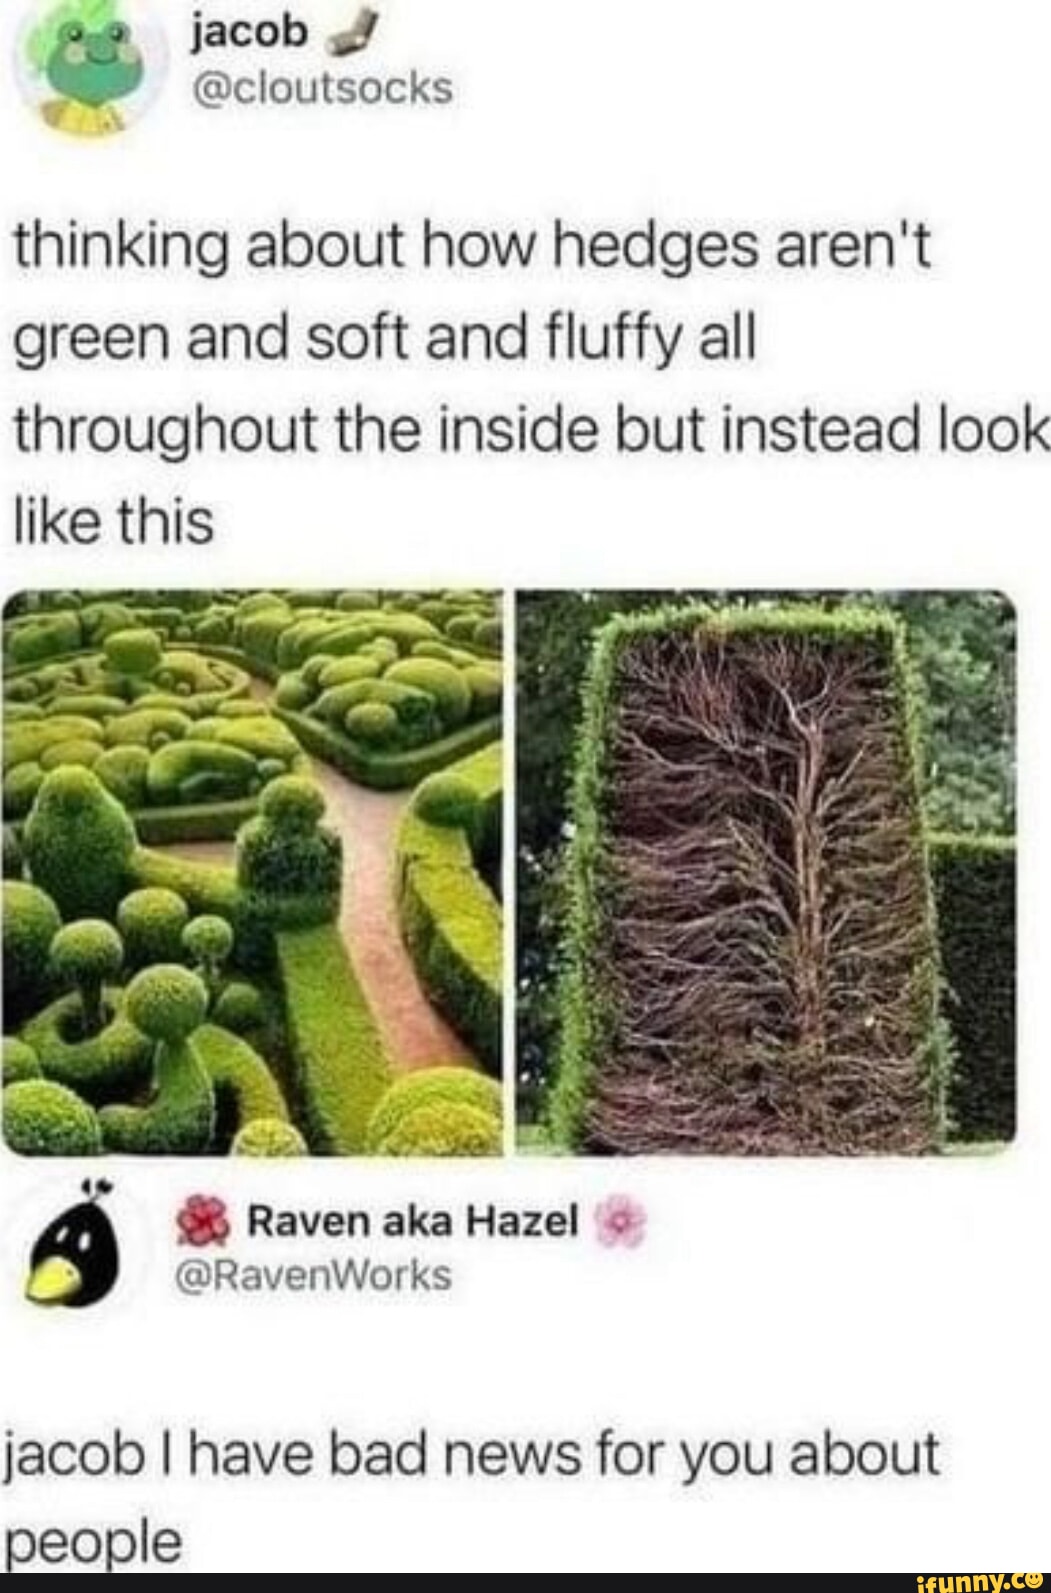 jacob thinking about how hedges aren't green and soft and fluffy all throughout the inside but instead look like this I I Raven aka Hazel @Ravenwiarks jacob I have bad news for you about people